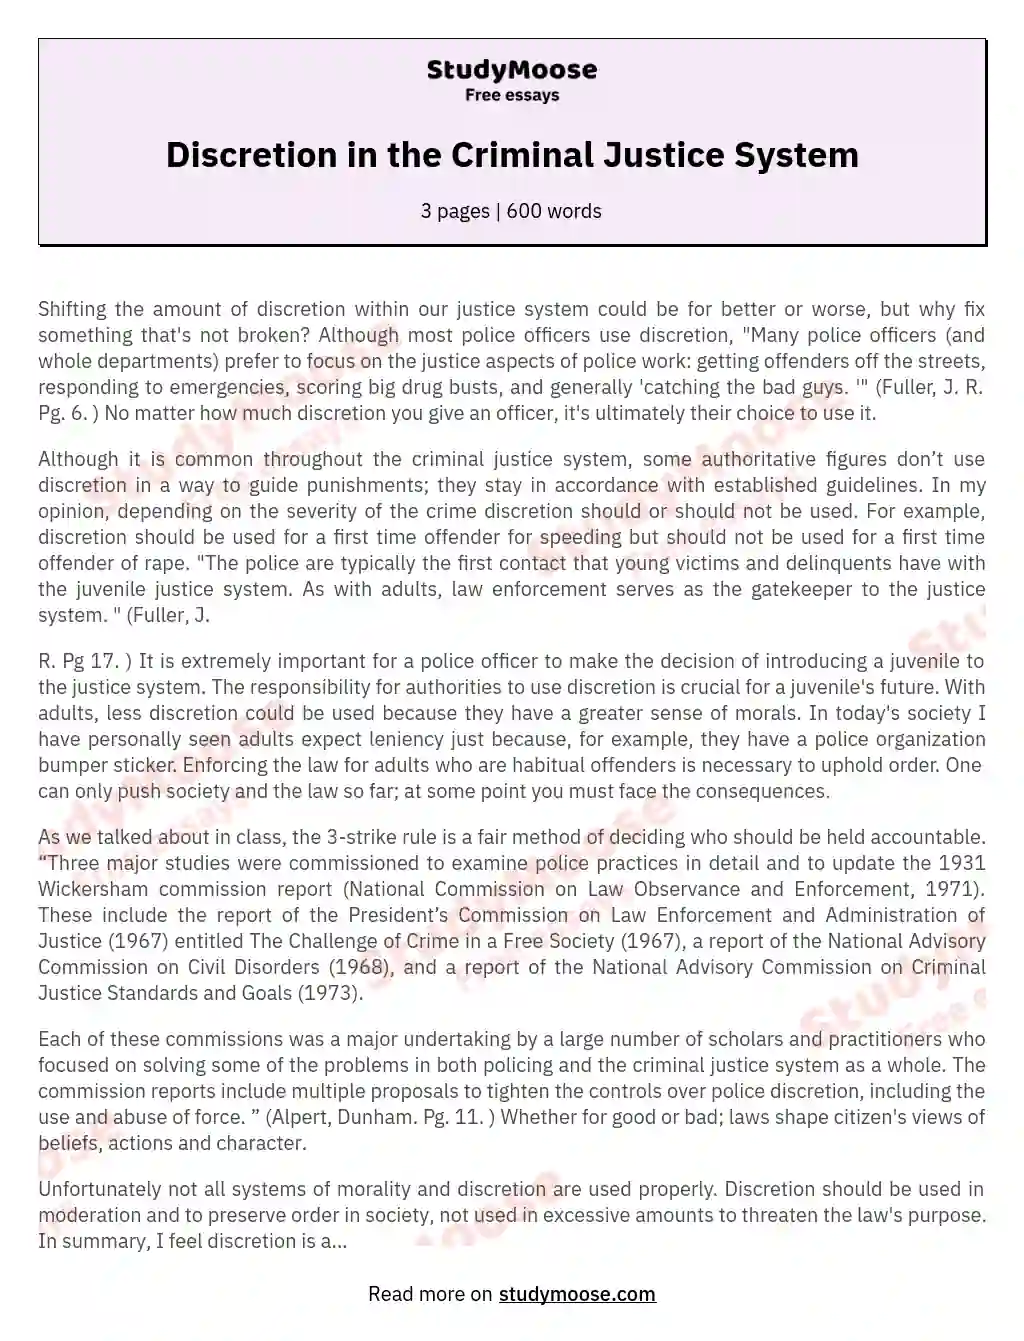 Discretion in the Criminal Justice System essay